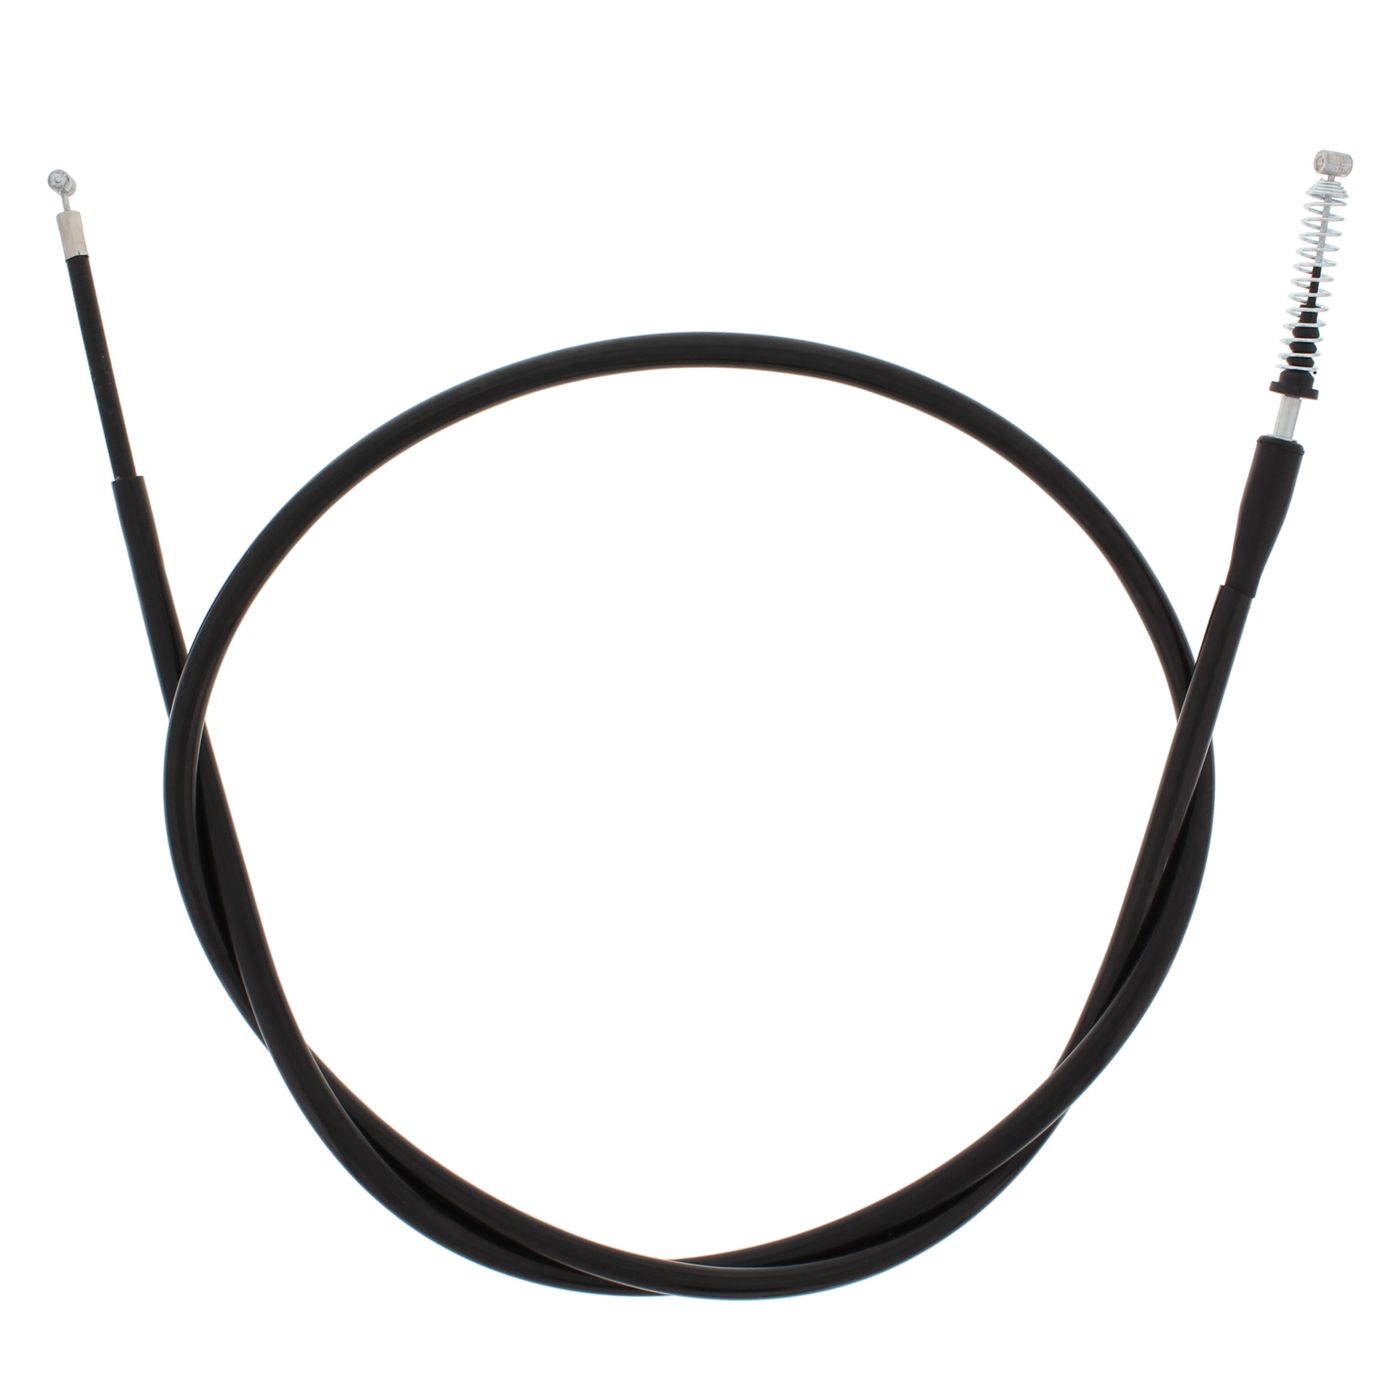 Wrp Brake Cables - WRP454013 image